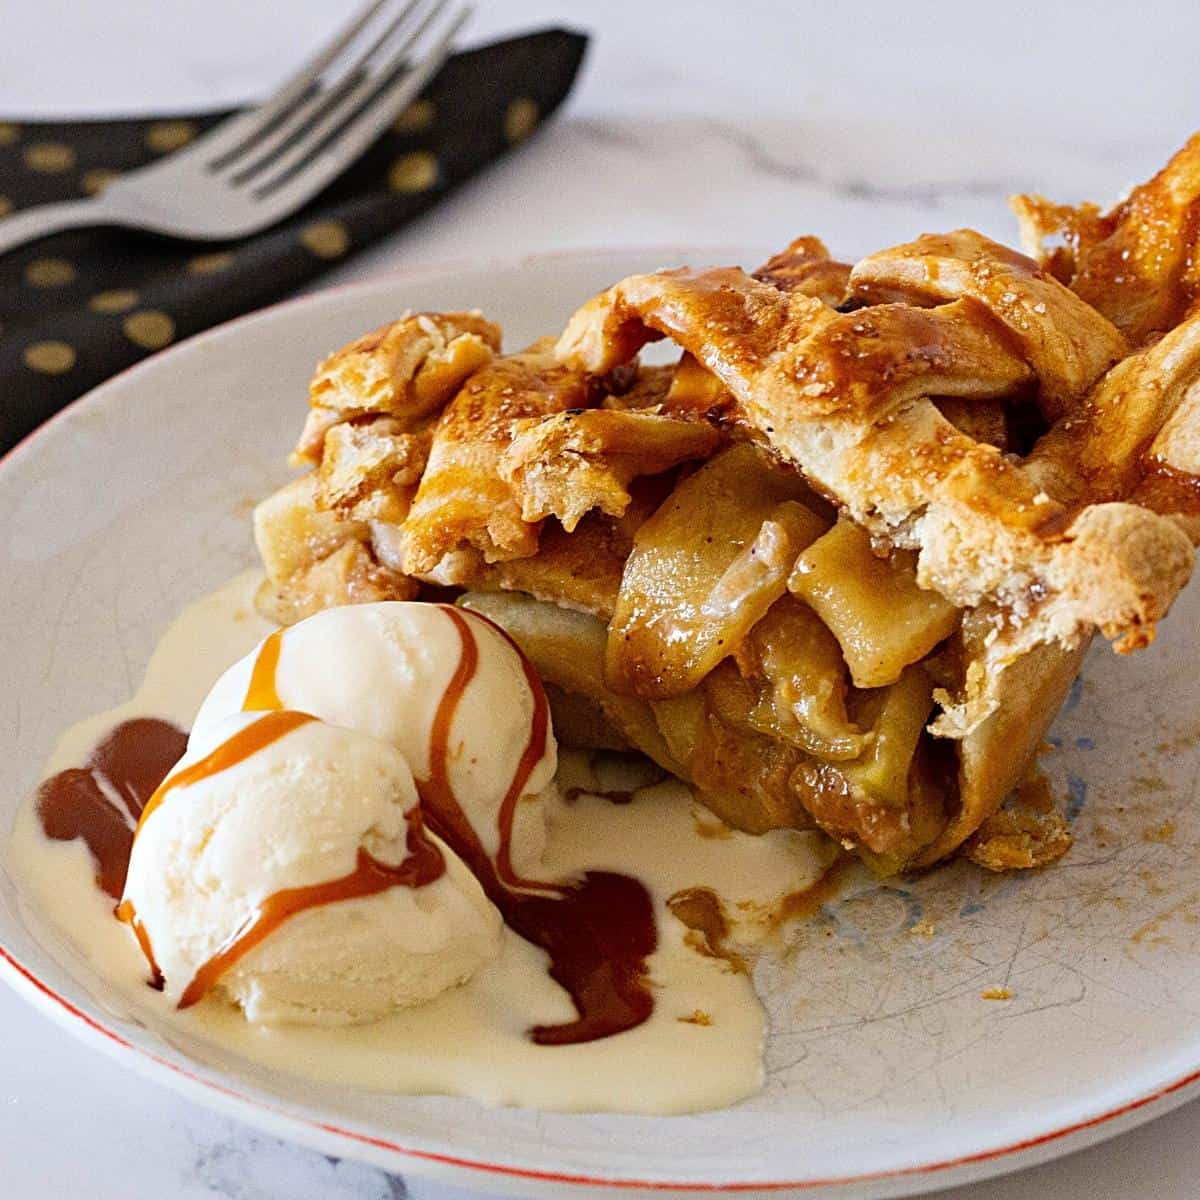 A slice of apple pie with caramel and ice cream.